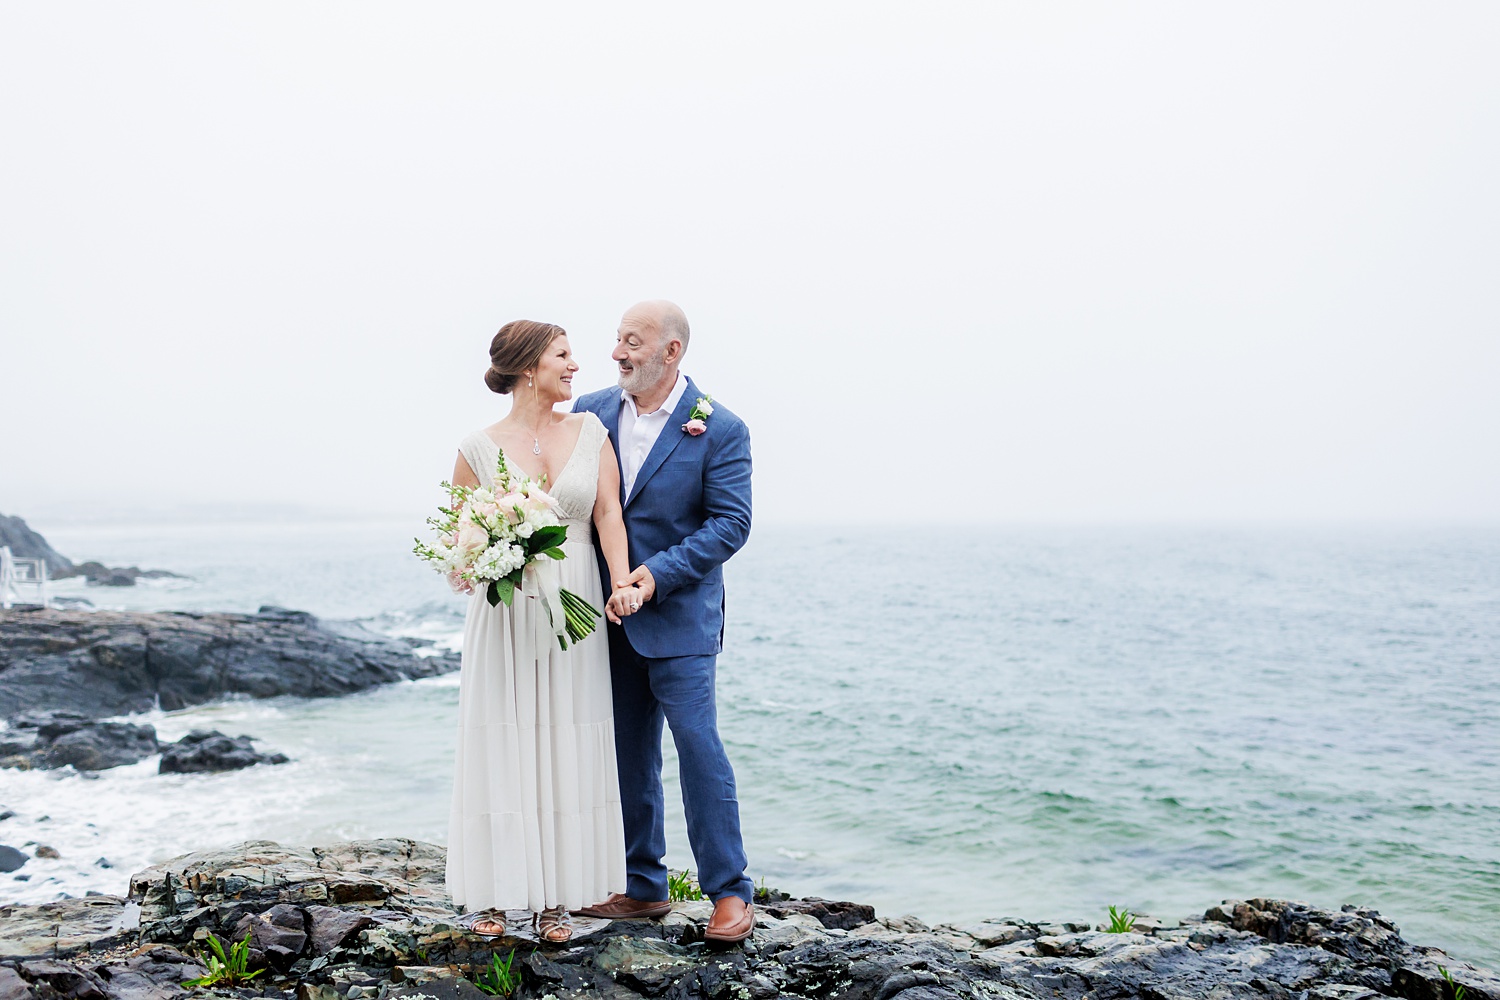 A laugh on the cliffs overlooking the views on Marginal Way Maine for the couple who eloped